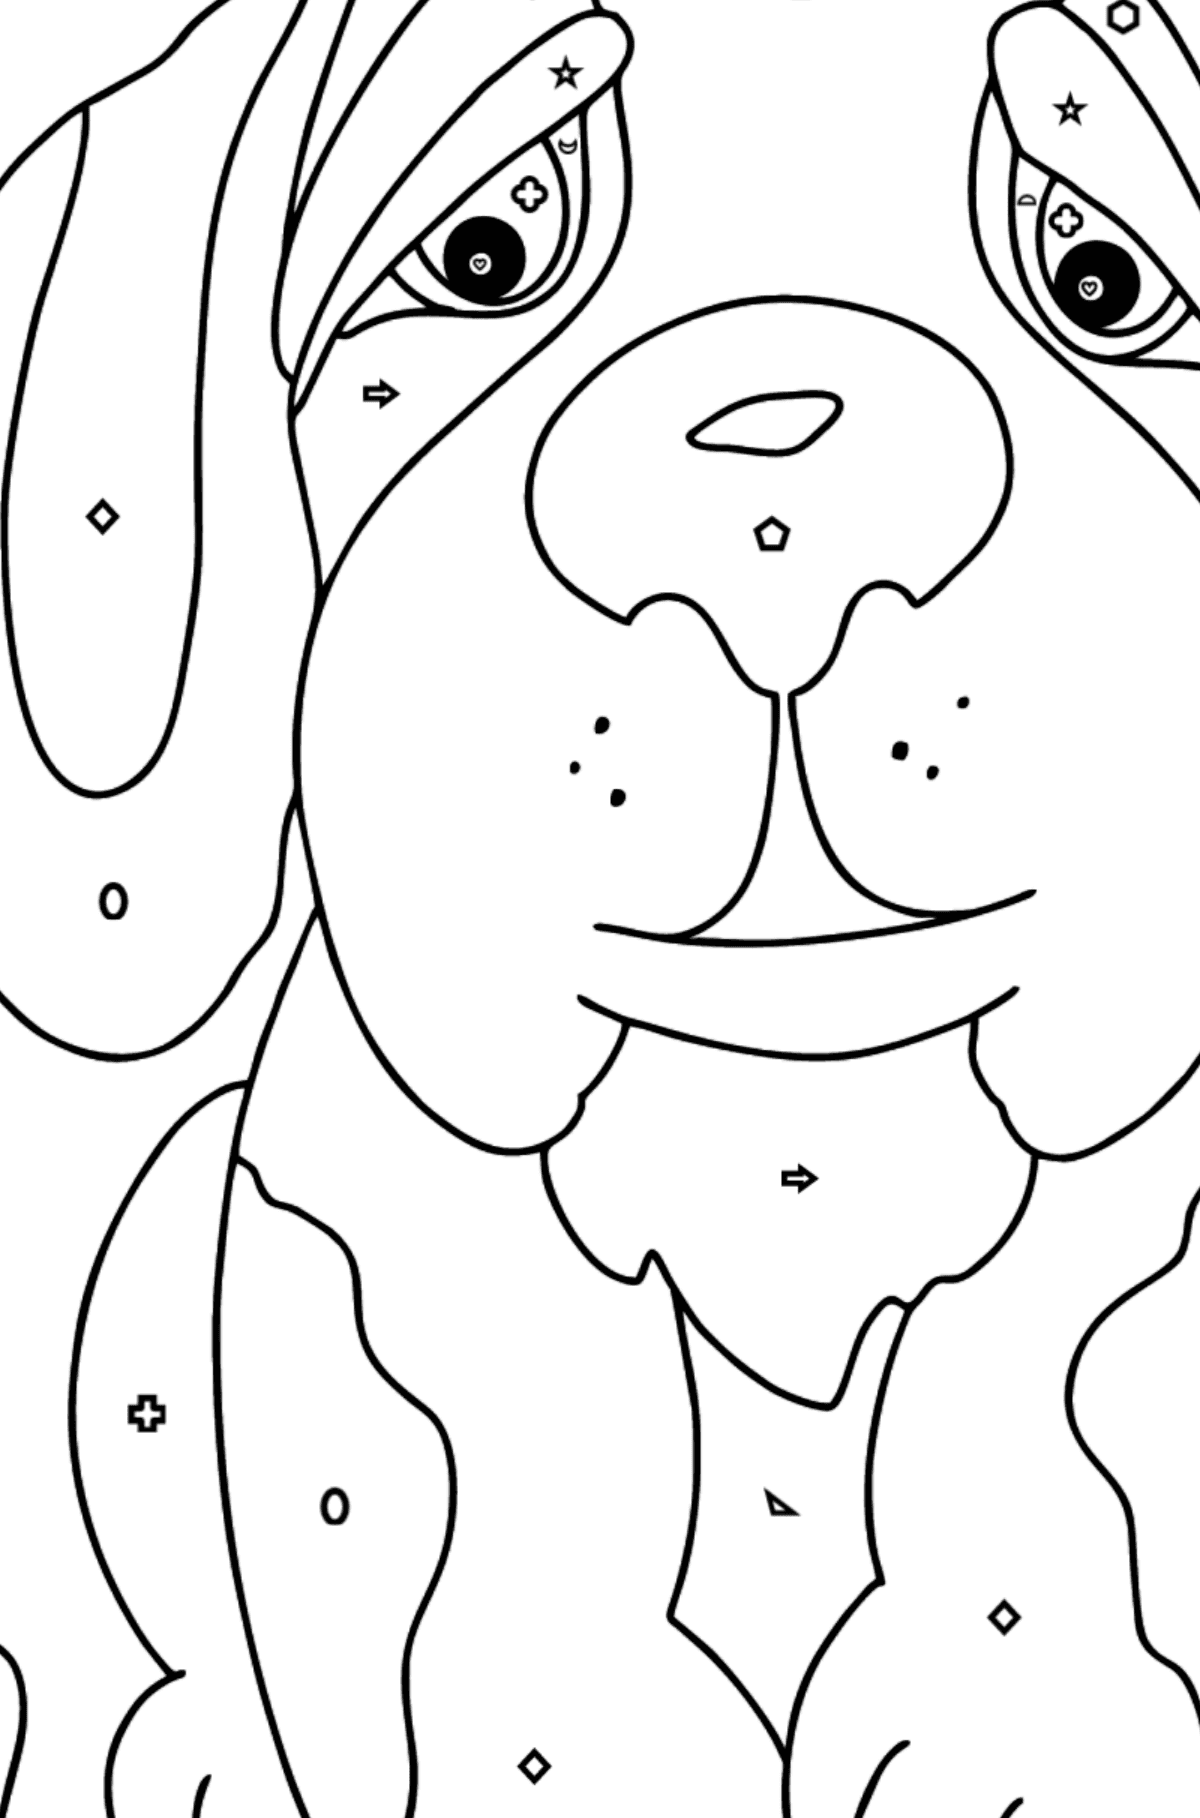 Coloring Page - A Dog is Watching a Butterfly - Coloring by Geometric Shapes for Kids